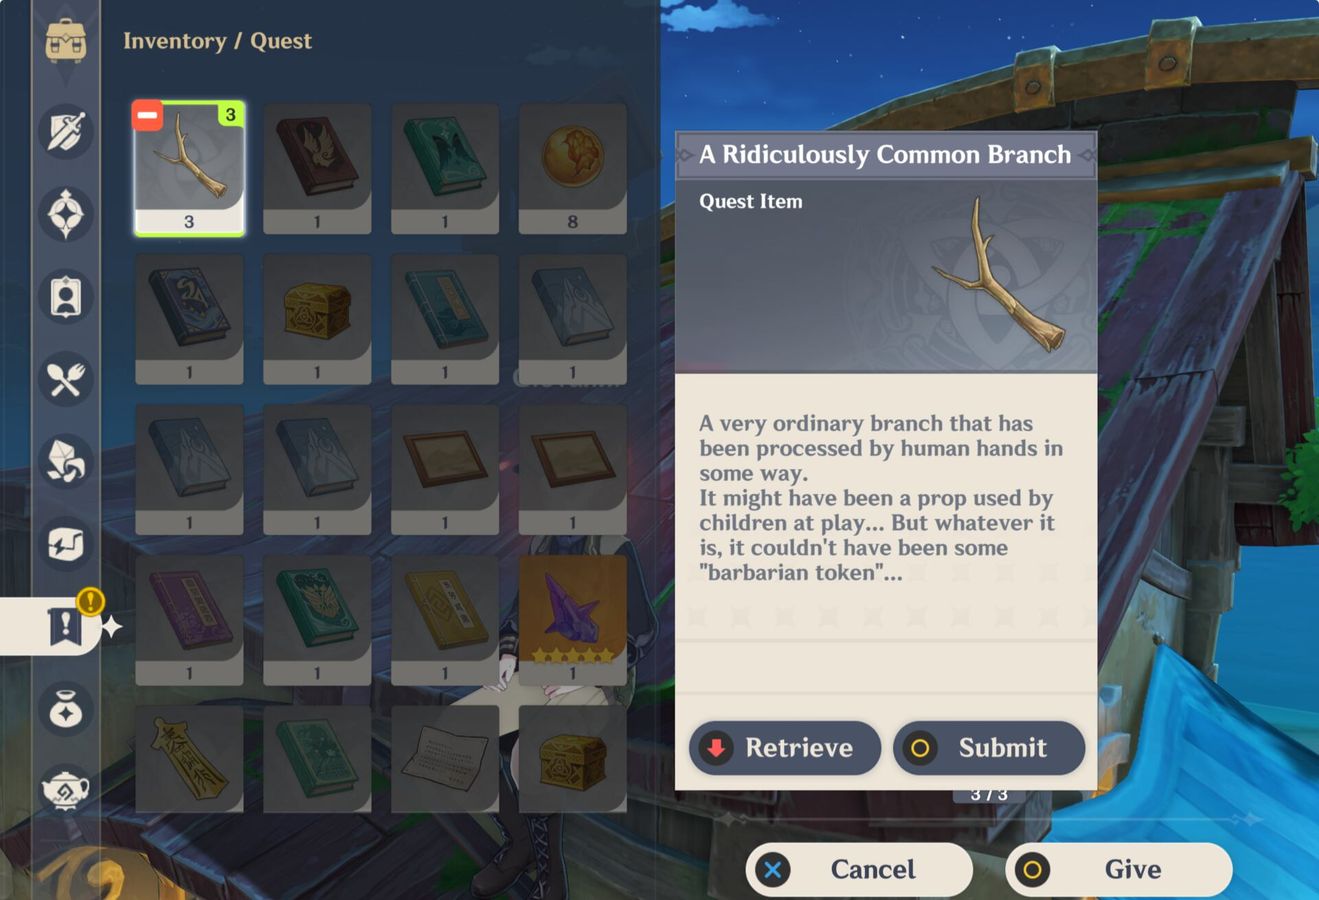 A screenshot of a Ridiculously Common Branch in the player's inventory, as the player submits them to Giovanni.